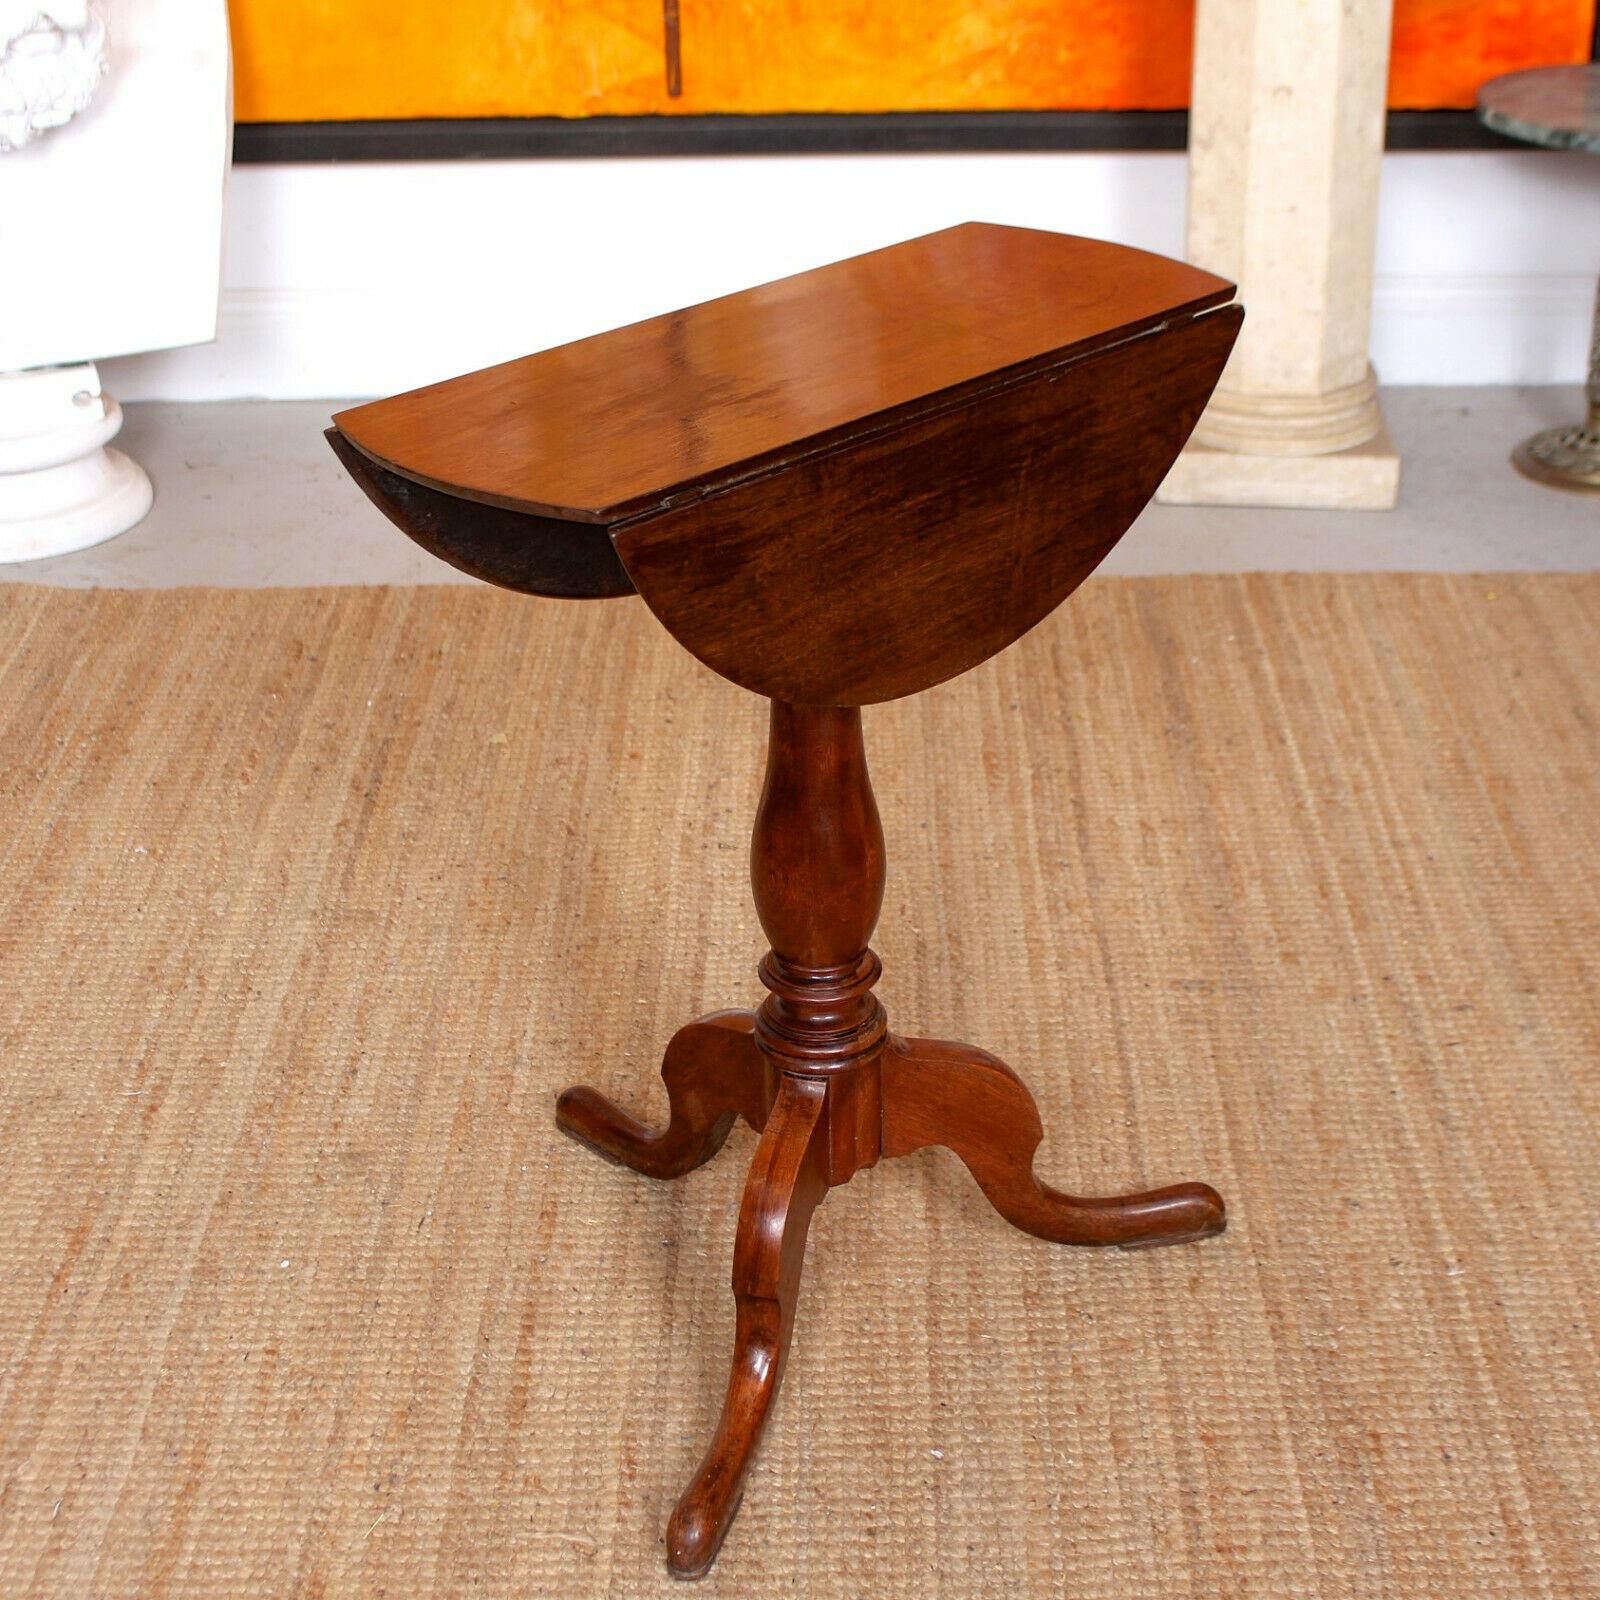 English Side Table Drop-Leaf Tripod 19th Century Mahogany Victorian Side Table For Sale 3